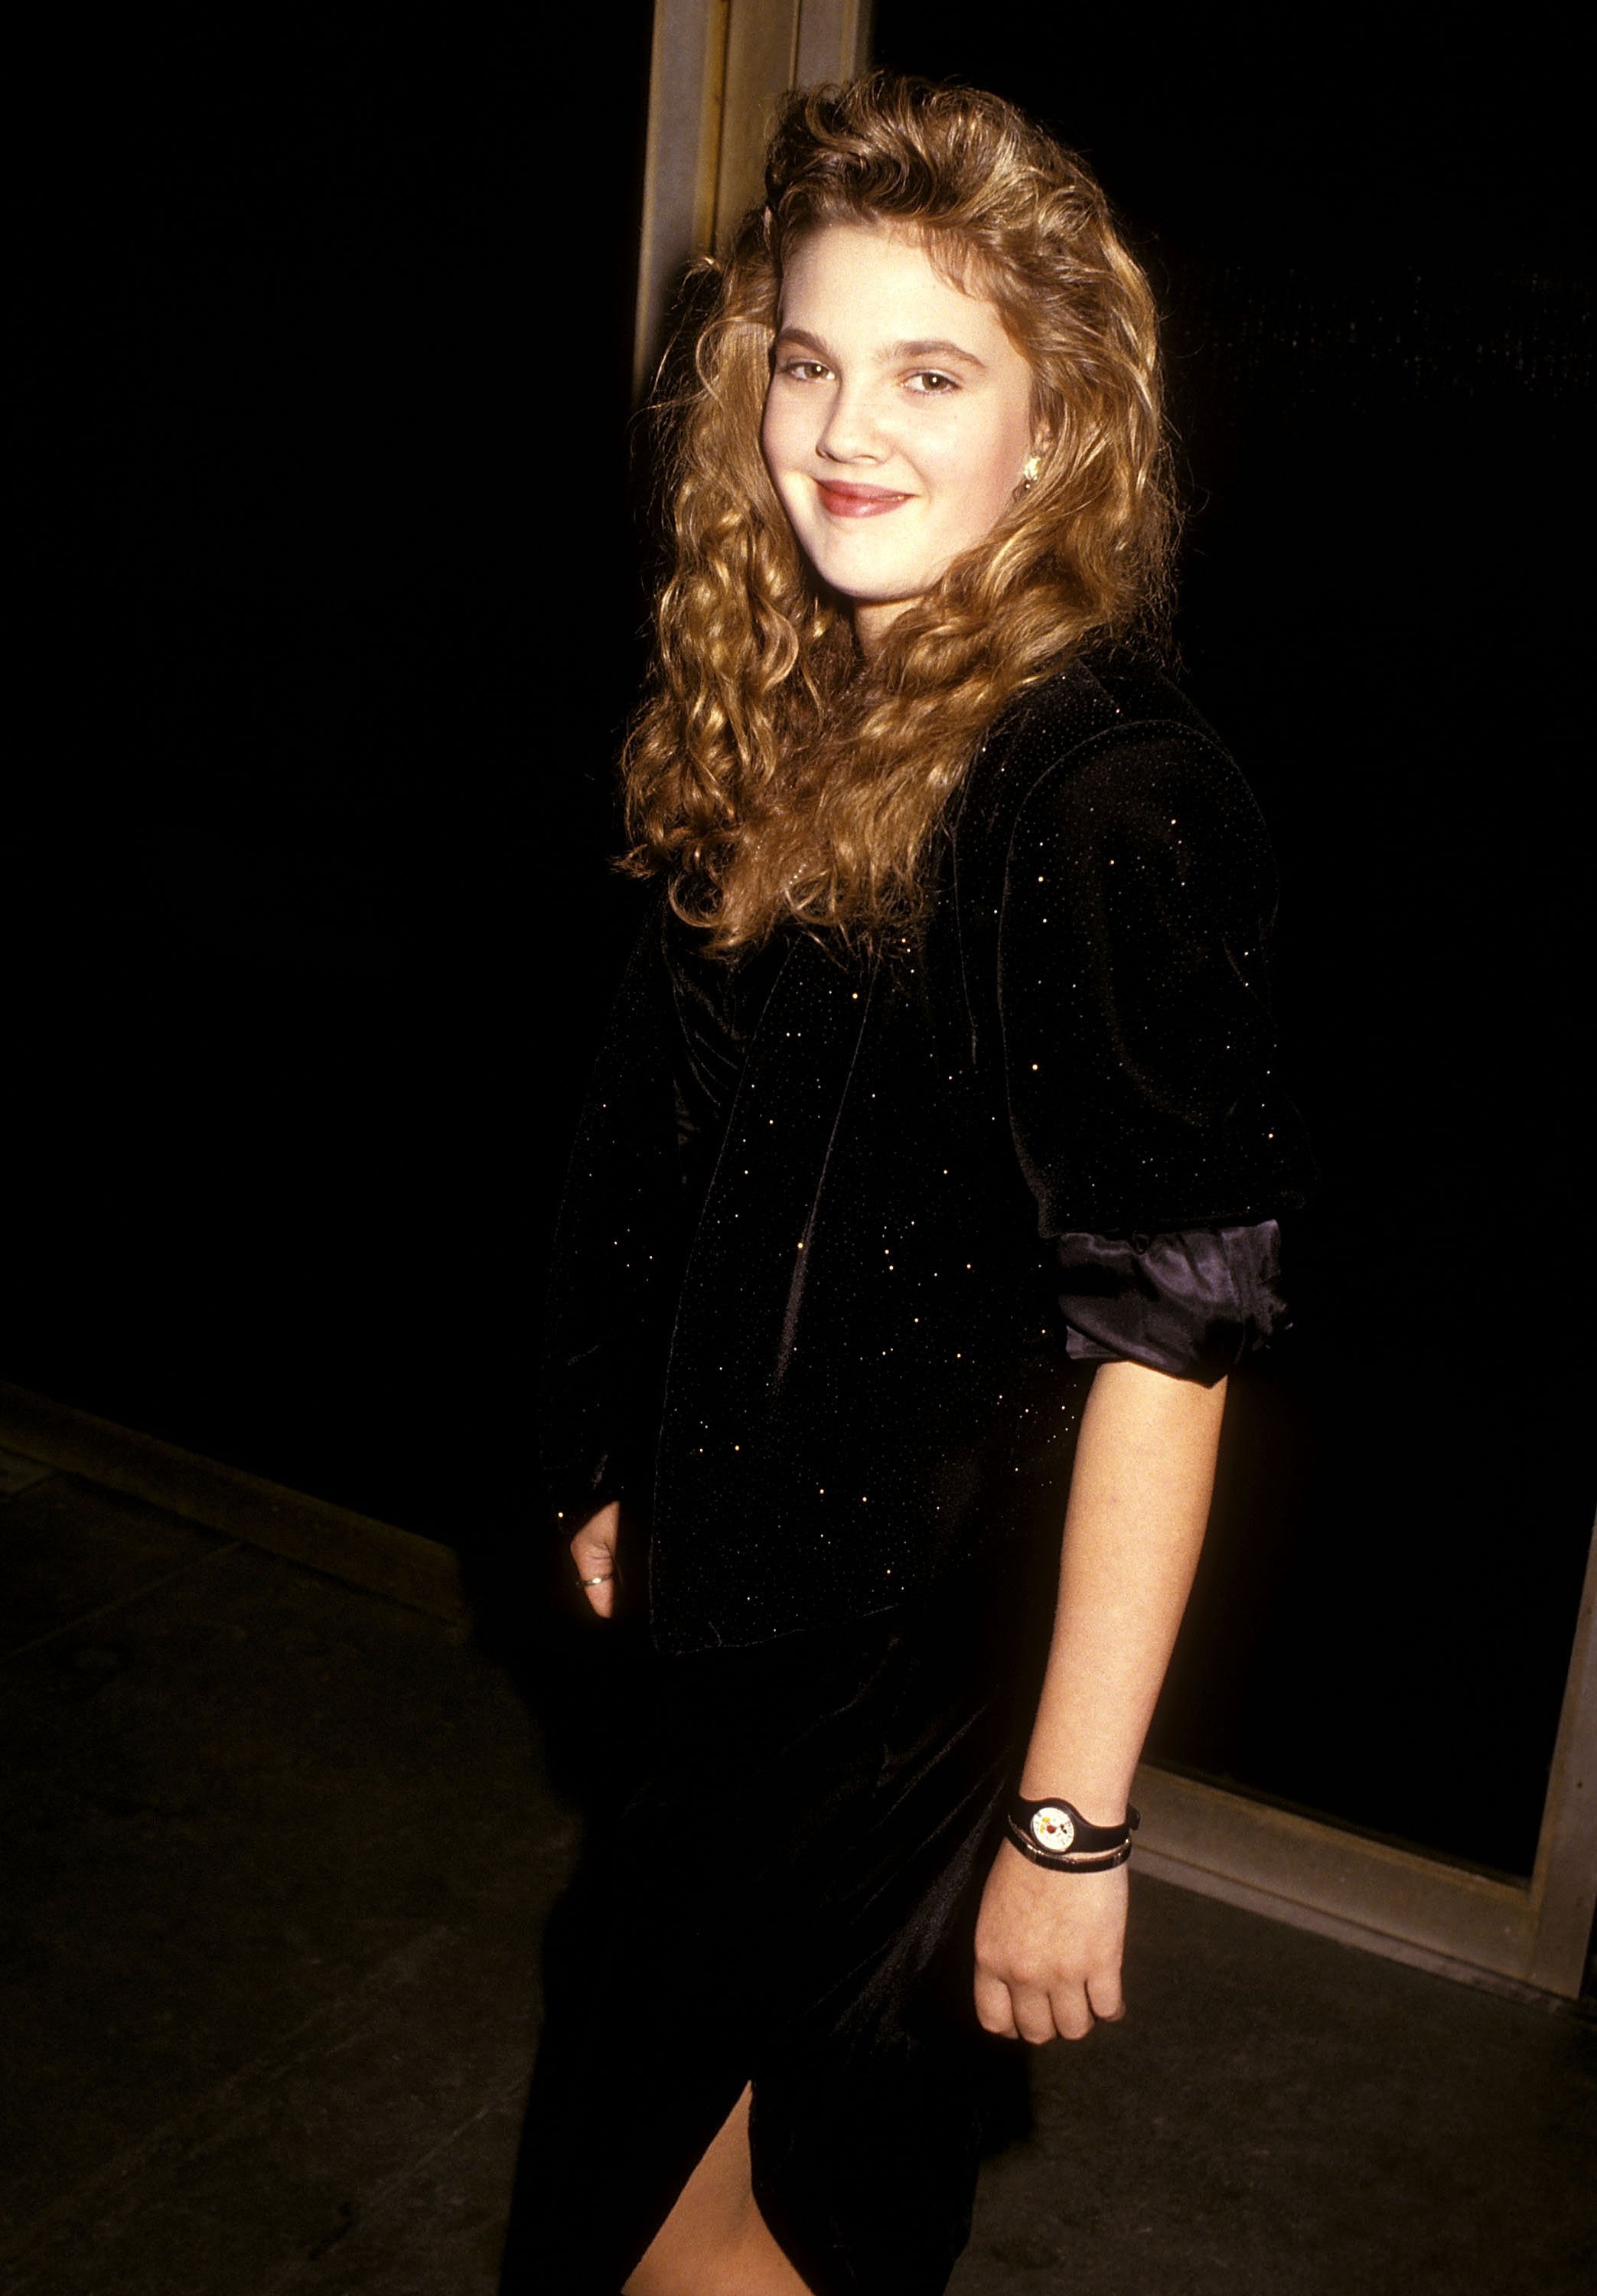 Drew Barrymore attends the Ninth Annual Youth in Film/Young Artist Awards on December 5, 1987 at Hollywood Palladium in Hollywood, California | Photo: Getty Images